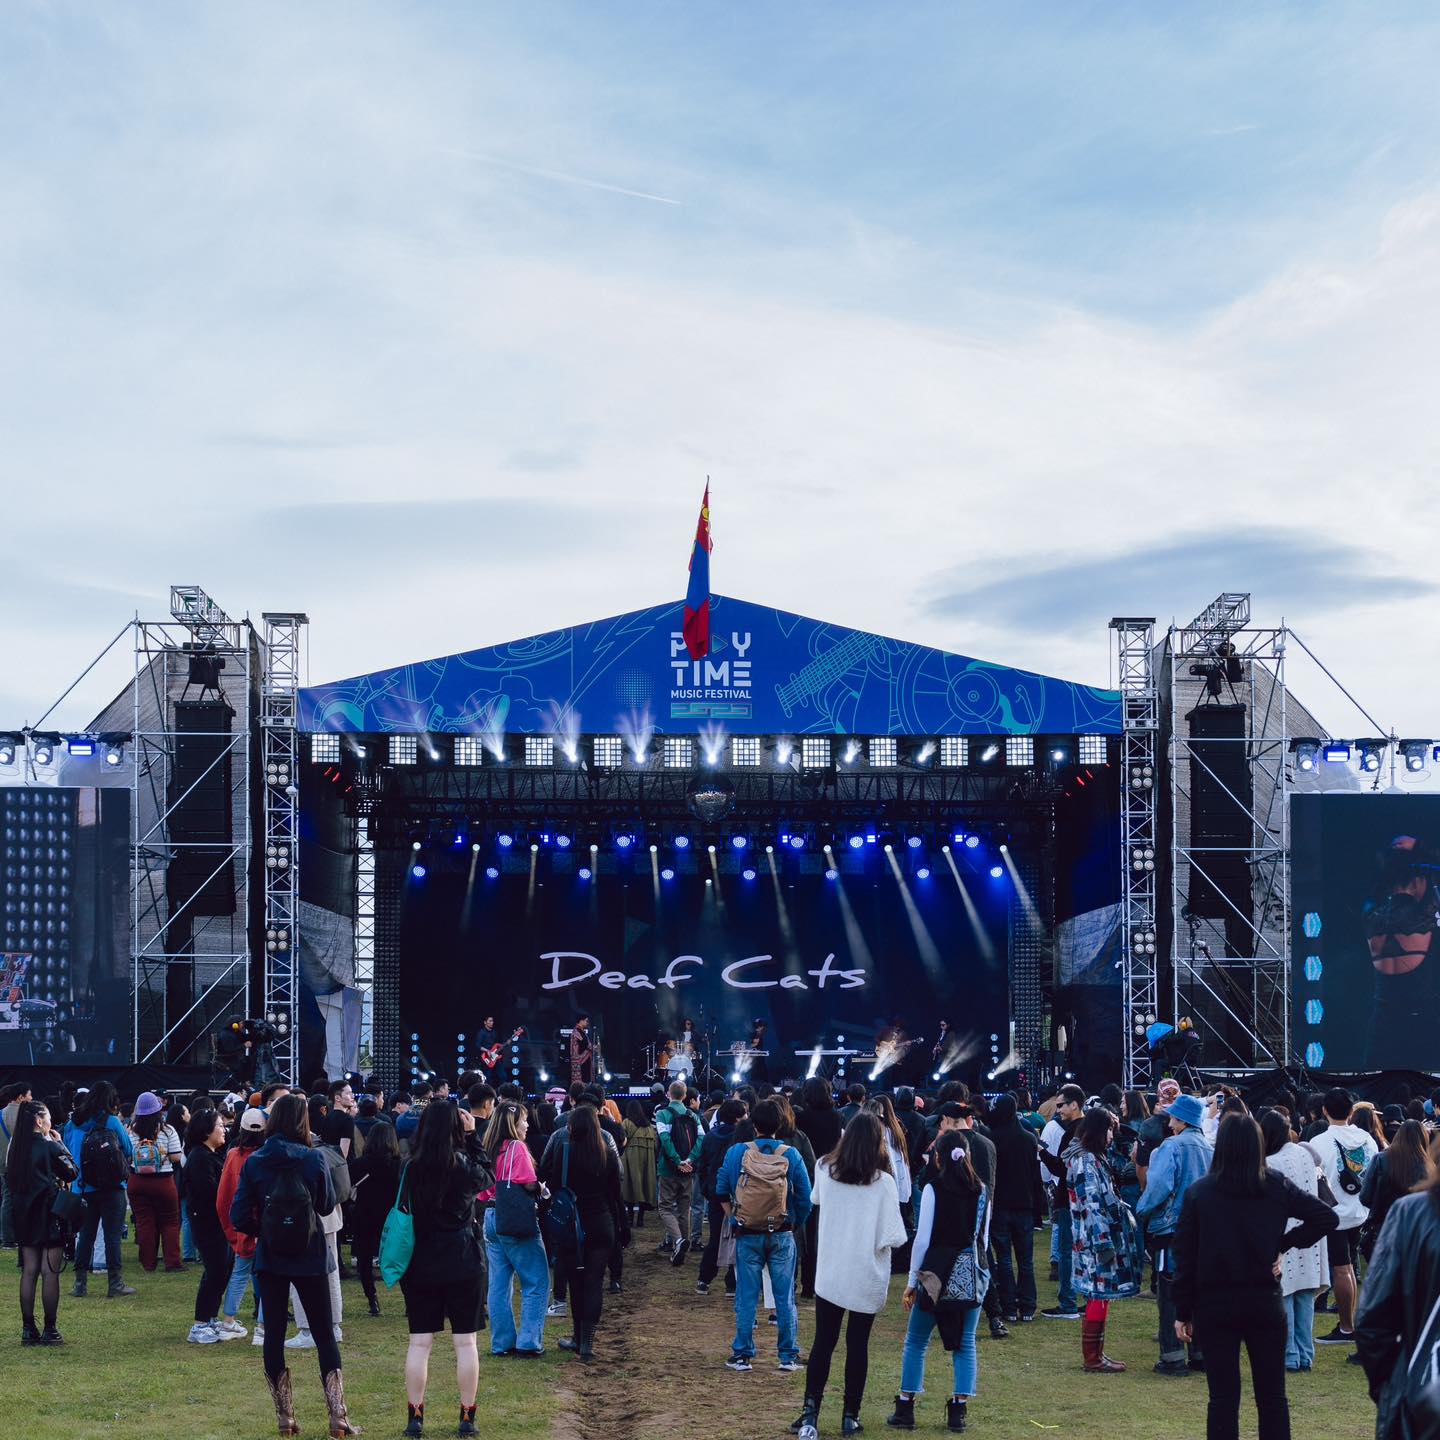 Things to know about The Playtime Festival